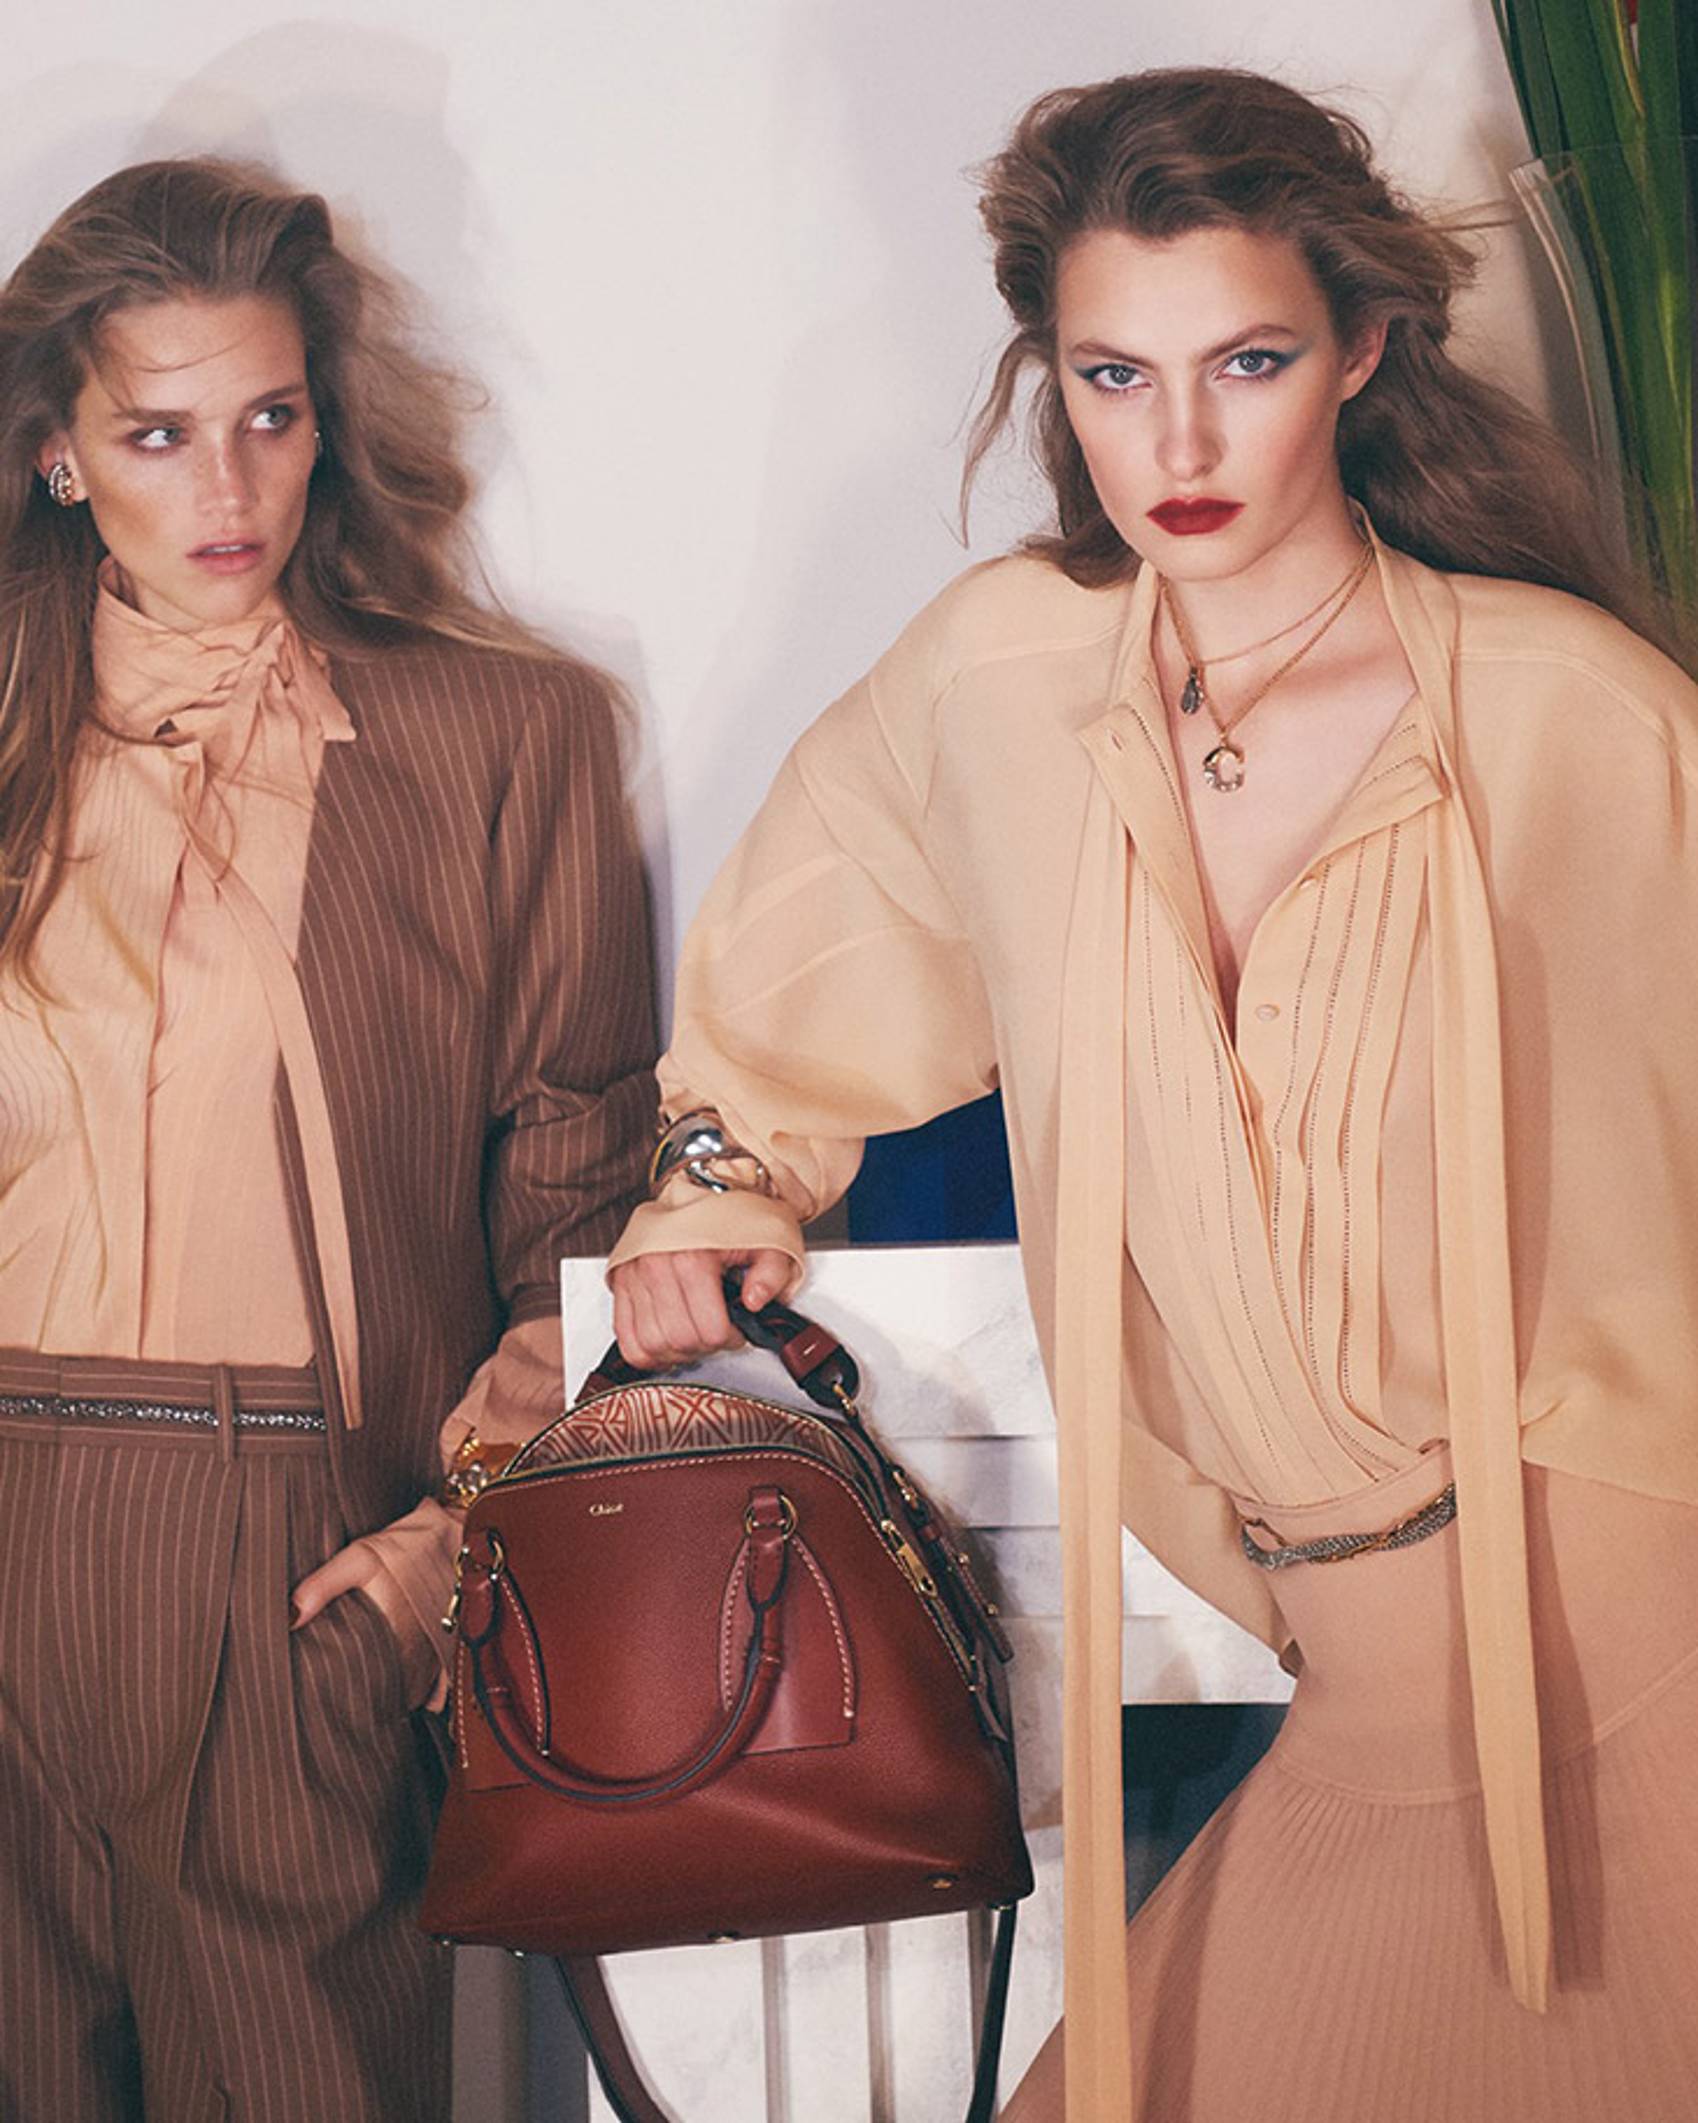 CHLOÉ SS20 CAMPAIGN - HANDLE WITH GRACE